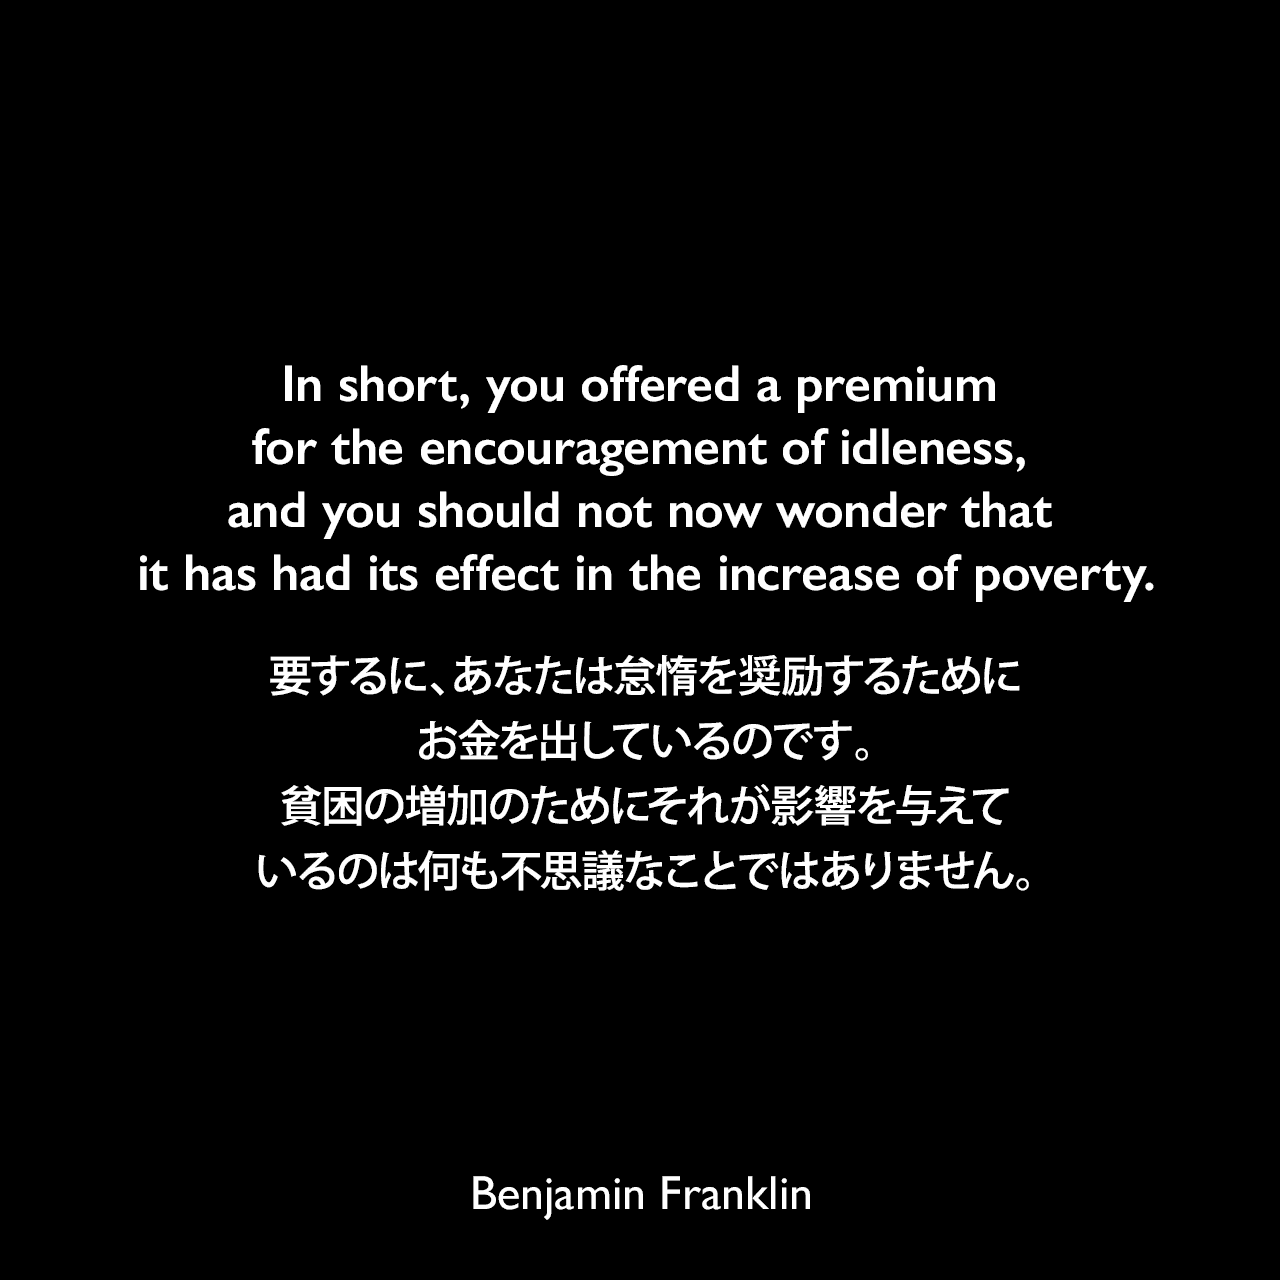 In short, you offered a premium for the encouragement of idleness, and you should not now wonder that it has had its effect in the increase of poverty.要するに、あなたは怠惰を奨励するためにお金を出しているのです。貧困の増加のためにそれが影響を与えているのは何も不思議なことではありません。- 「On the Price of Corn, and Management of the Poor（1766年）」よりBenjamin Franklin